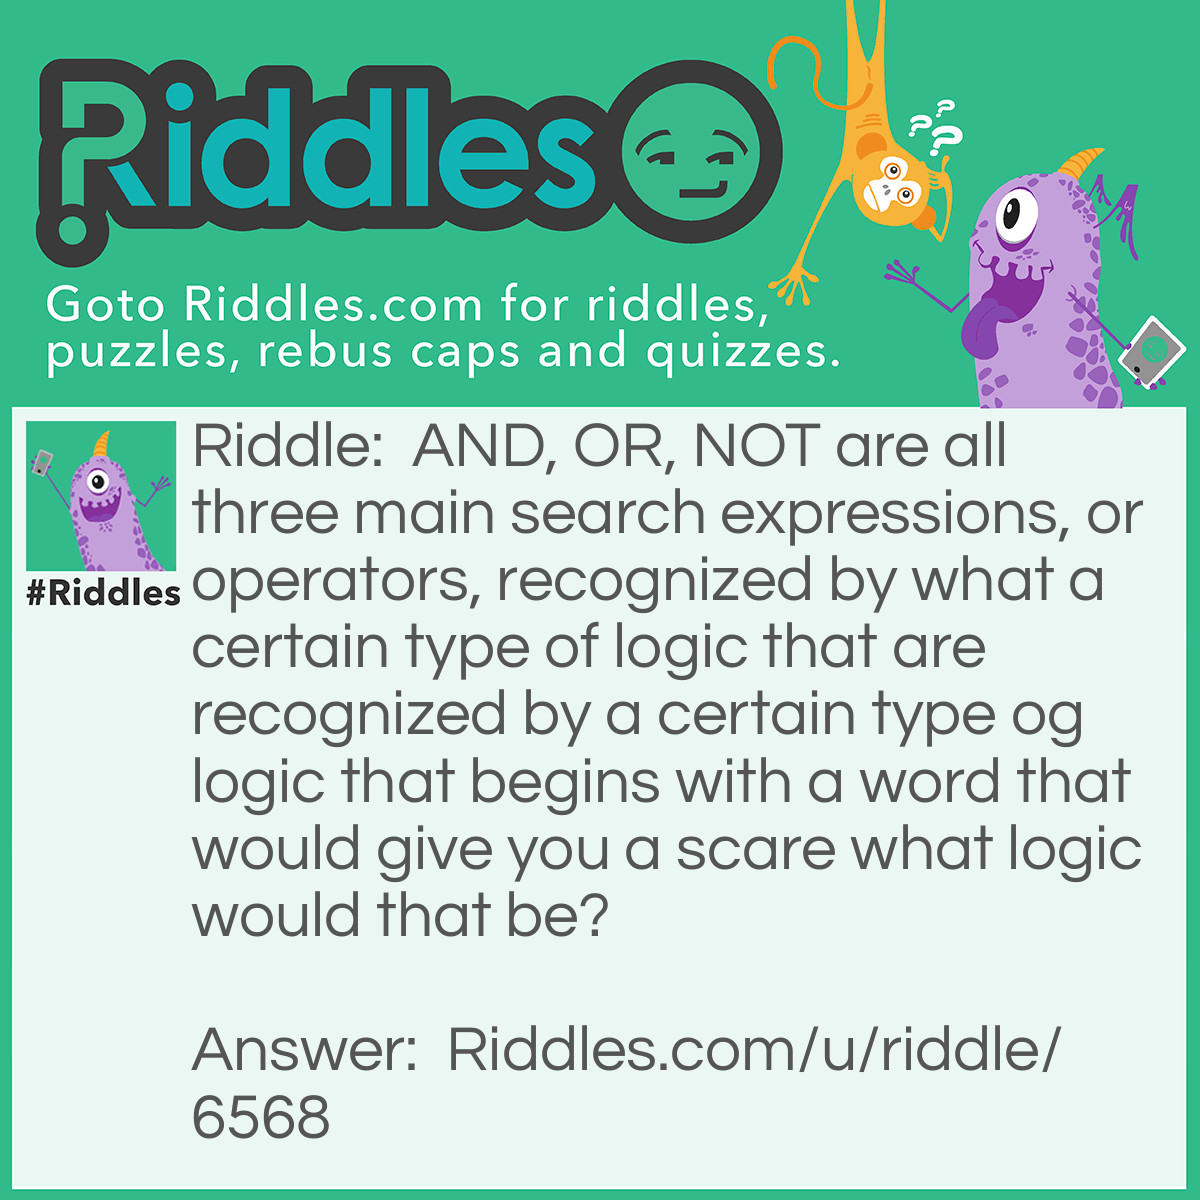 Riddle: AND, OR, NOT are all three main search expressions, or operators, recognized by what a certain type of logic that are recognized by a certain type og logic that begins with a word that would give you a scare what logic would that be? Answer: Boolean